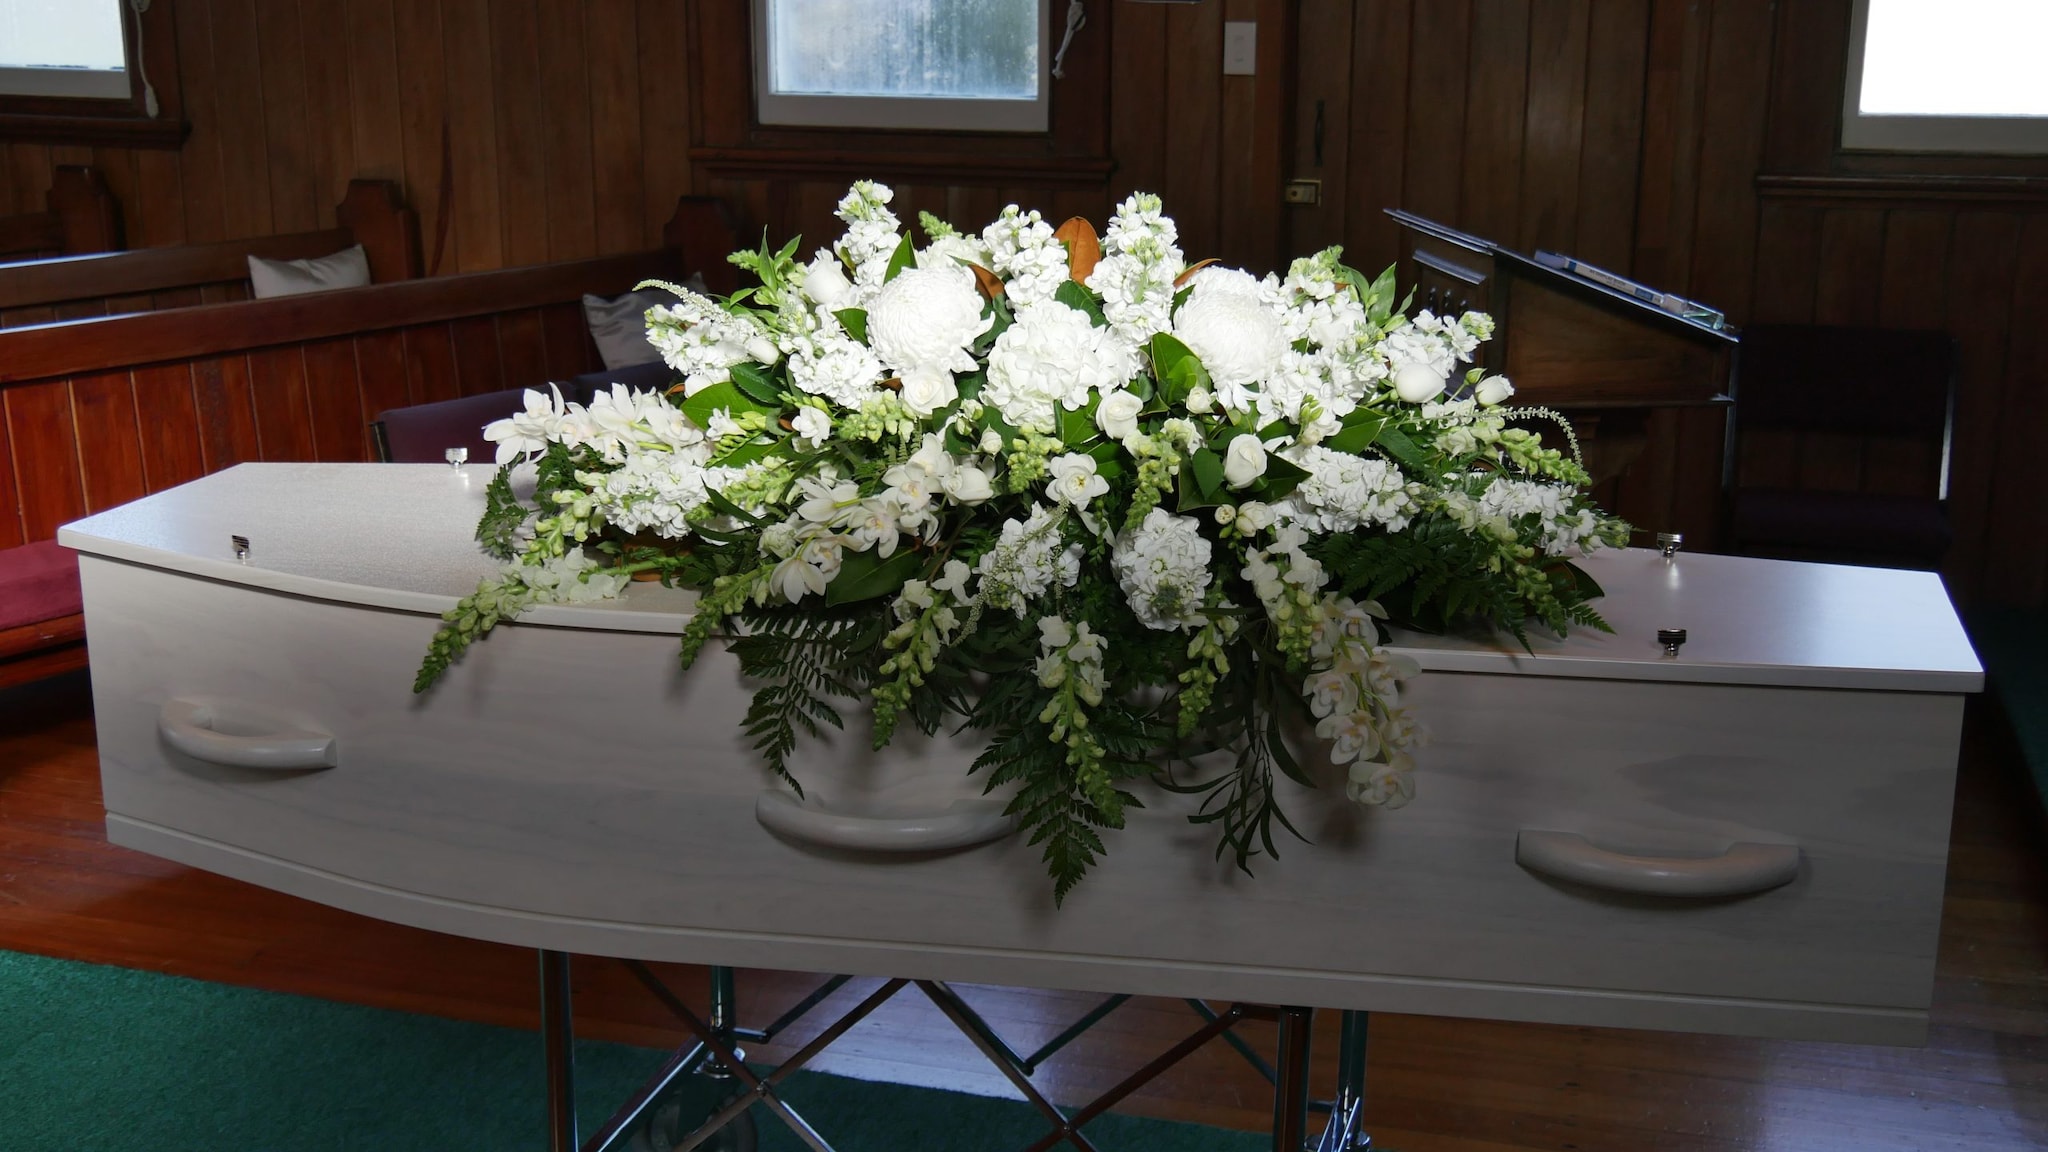 Image shows a white casket sitting on a raised holder. It has a large spray of white flowers atop it and light shining down on it.